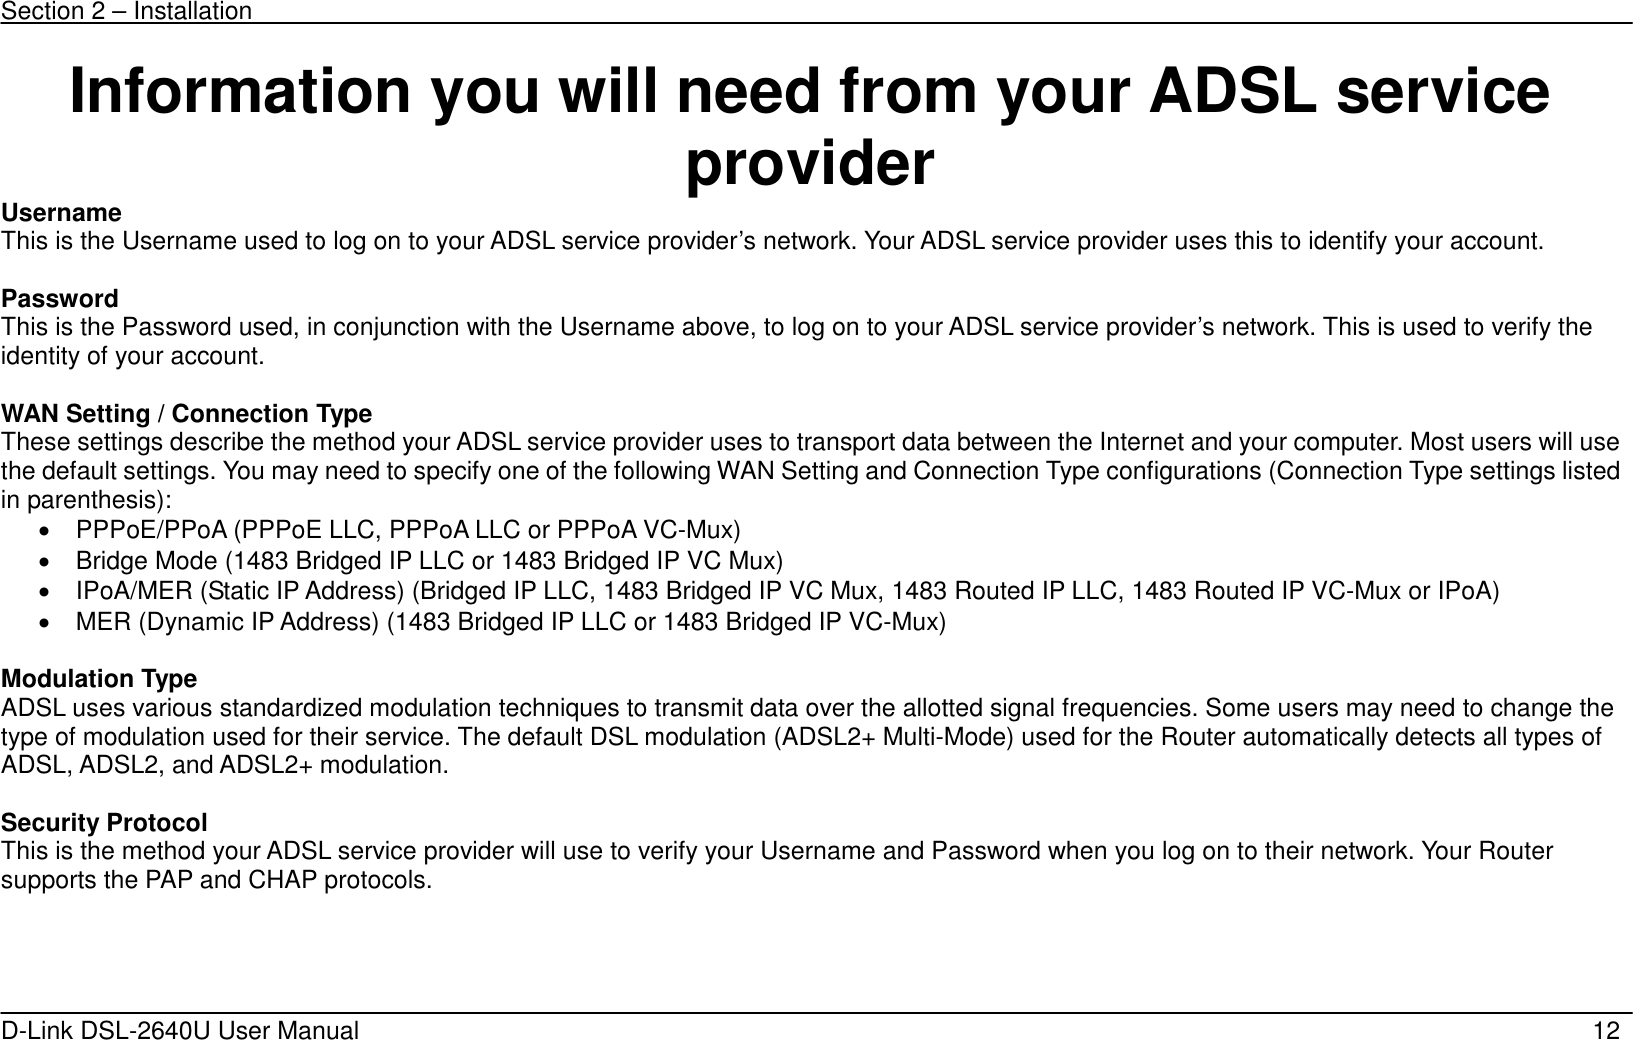 Section 2 – Installation   D-Link DSL-2640U User Manual    12 Information you will need from your ADSL service provider Username This is the Username used to log on to your ADSL service provider’s network. Your ADSL service provider uses this to identify your account.  Password This is the Password used, in conjunction with the Username above, to log on to your ADSL service provider’s network. This is used to verify the identity of your account.  WAN Setting / Connection Type These settings describe the method your ADSL service provider uses to transport data between the Internet and your computer. Most users will use the default settings. You may need to specify one of the following WAN Setting and Connection Type configurations (Connection Type settings listed in parenthesis):   •  PPPoE/PPoA (PPPoE LLC, PPPoA LLC or PPPoA VC-Mux) •  Bridge Mode (1483 Bridged IP LLC or 1483 Bridged IP VC Mux) •  IPoA/MER (Static IP Address) (Bridged IP LLC, 1483 Bridged IP VC Mux, 1483 Routed IP LLC, 1483 Routed IP VC-Mux or IPoA) •  MER (Dynamic IP Address) (1483 Bridged IP LLC or 1483 Bridged IP VC-Mux)      Modulation Type ADSL uses various standardized modulation techniques to transmit data over the allotted signal frequencies. Some users may need to change the type of modulation used for their service. The default DSL modulation (ADSL2+ Multi-Mode) used for the Router automatically detects all types of ADSL, ADSL2, and ADSL2+ modulation.  Security Protocol This is the method your ADSL service provider will use to verify your Username and Password when you log on to their network. Your Router supports the PAP and CHAP protocols.     